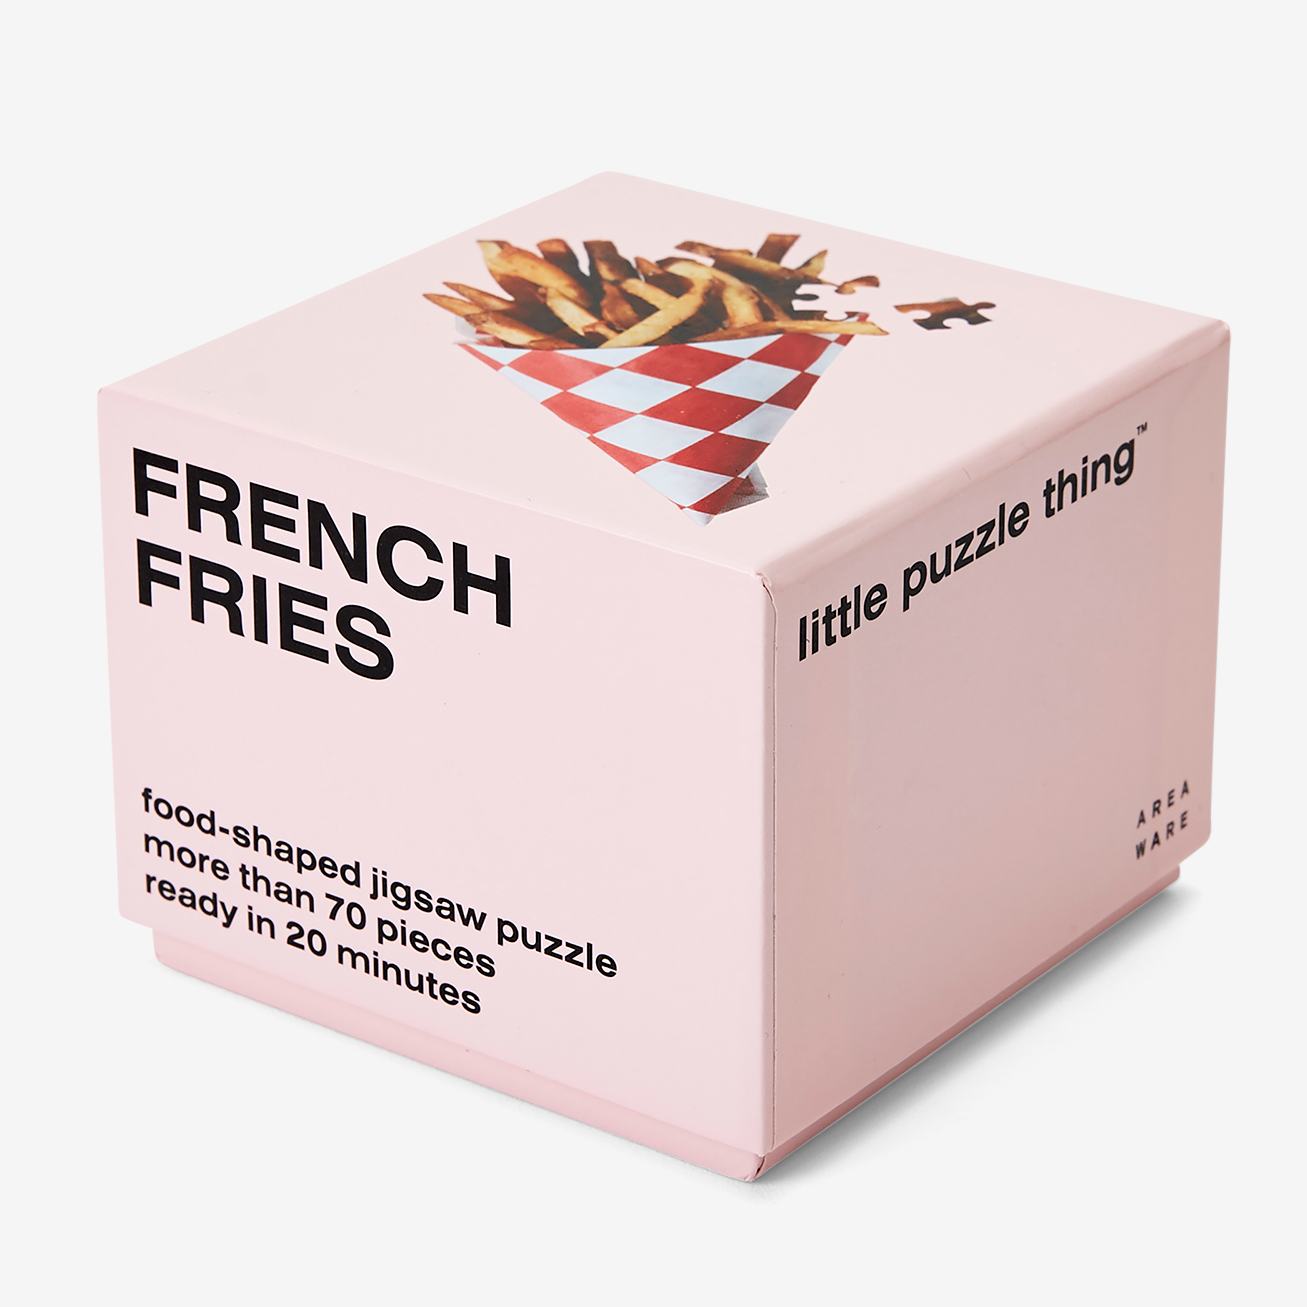 areaware little puzzle thing french fries - miniature food-shaped jigsaw puzzle